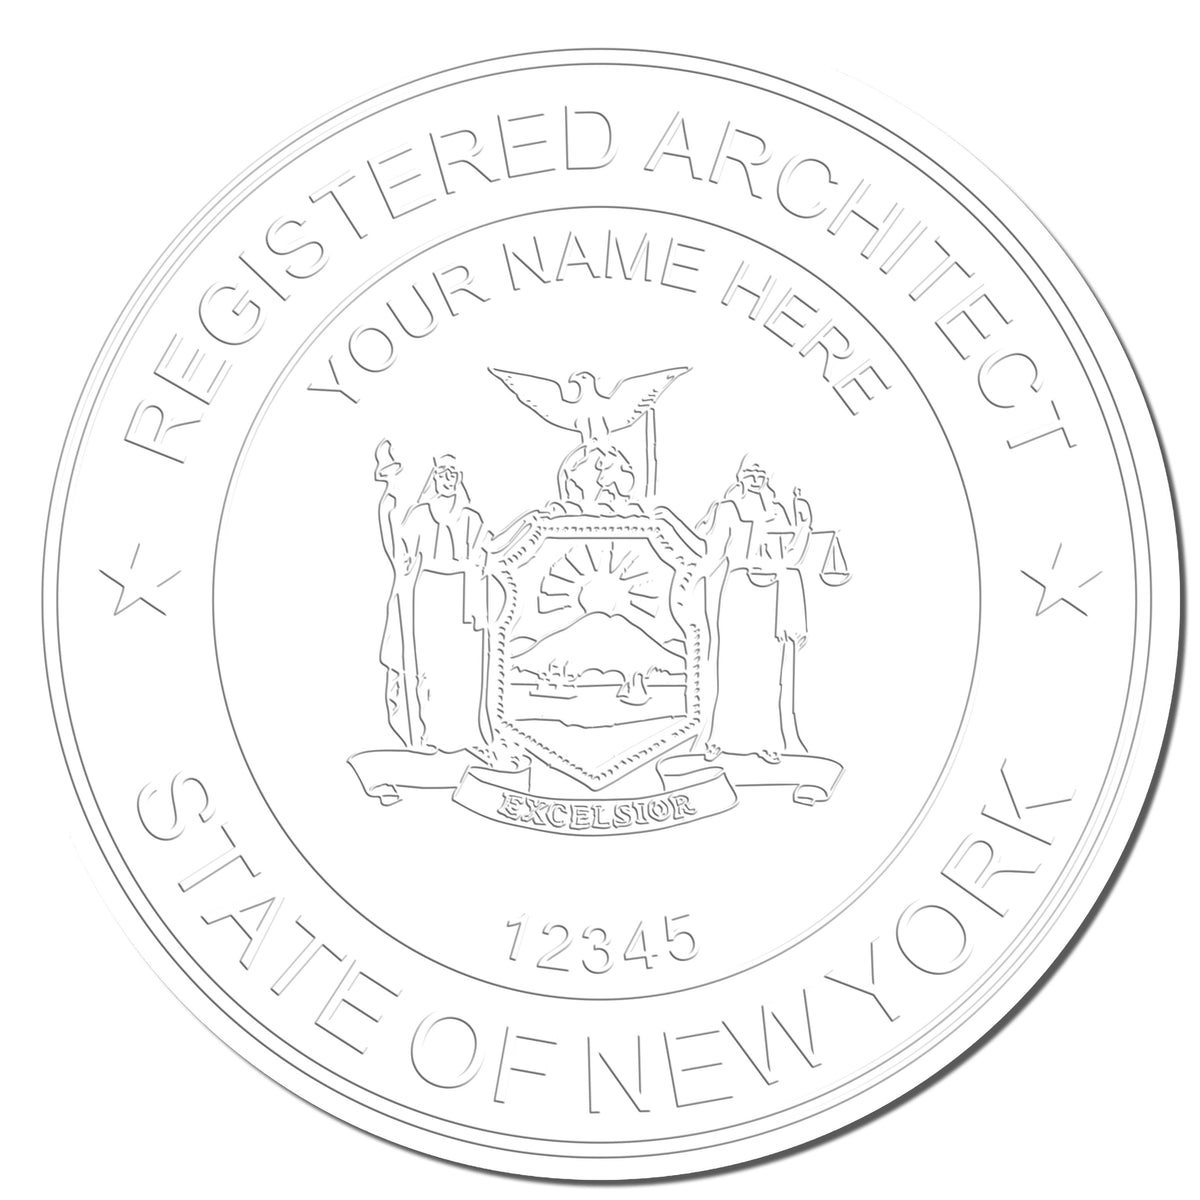 This paper is stamped with a sample imprint of the State of New York Architectural Seal Embosser, signifying its quality and reliability.